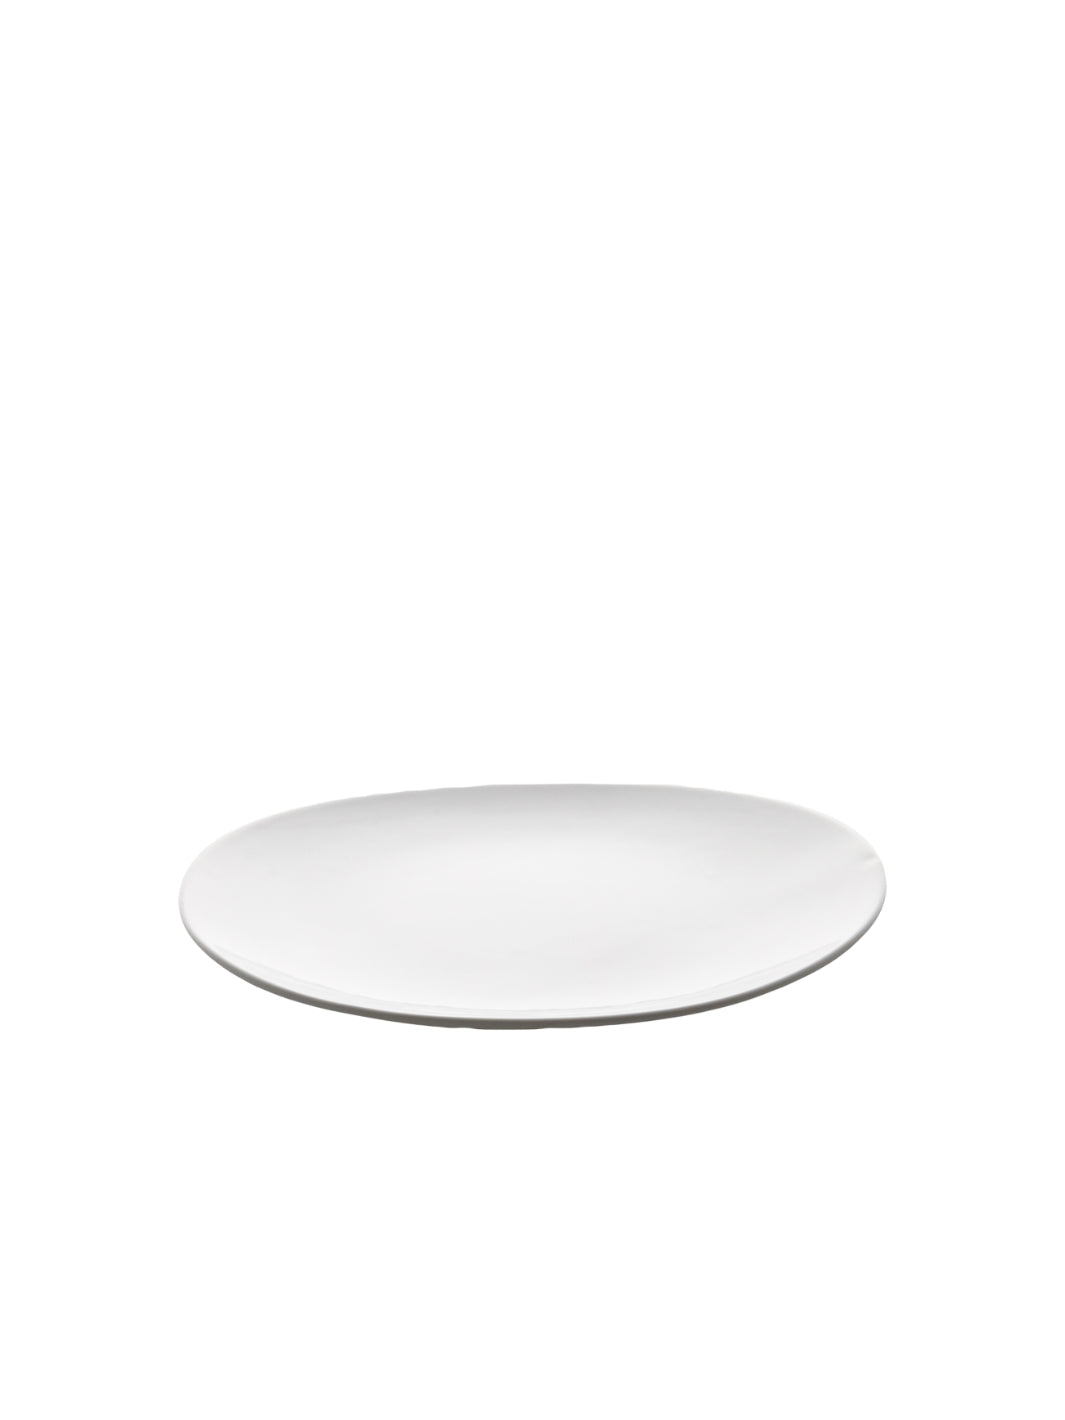 COOKPLAY Shell Dinner Plate (28.5x27.5cm/11.2x10.8in)